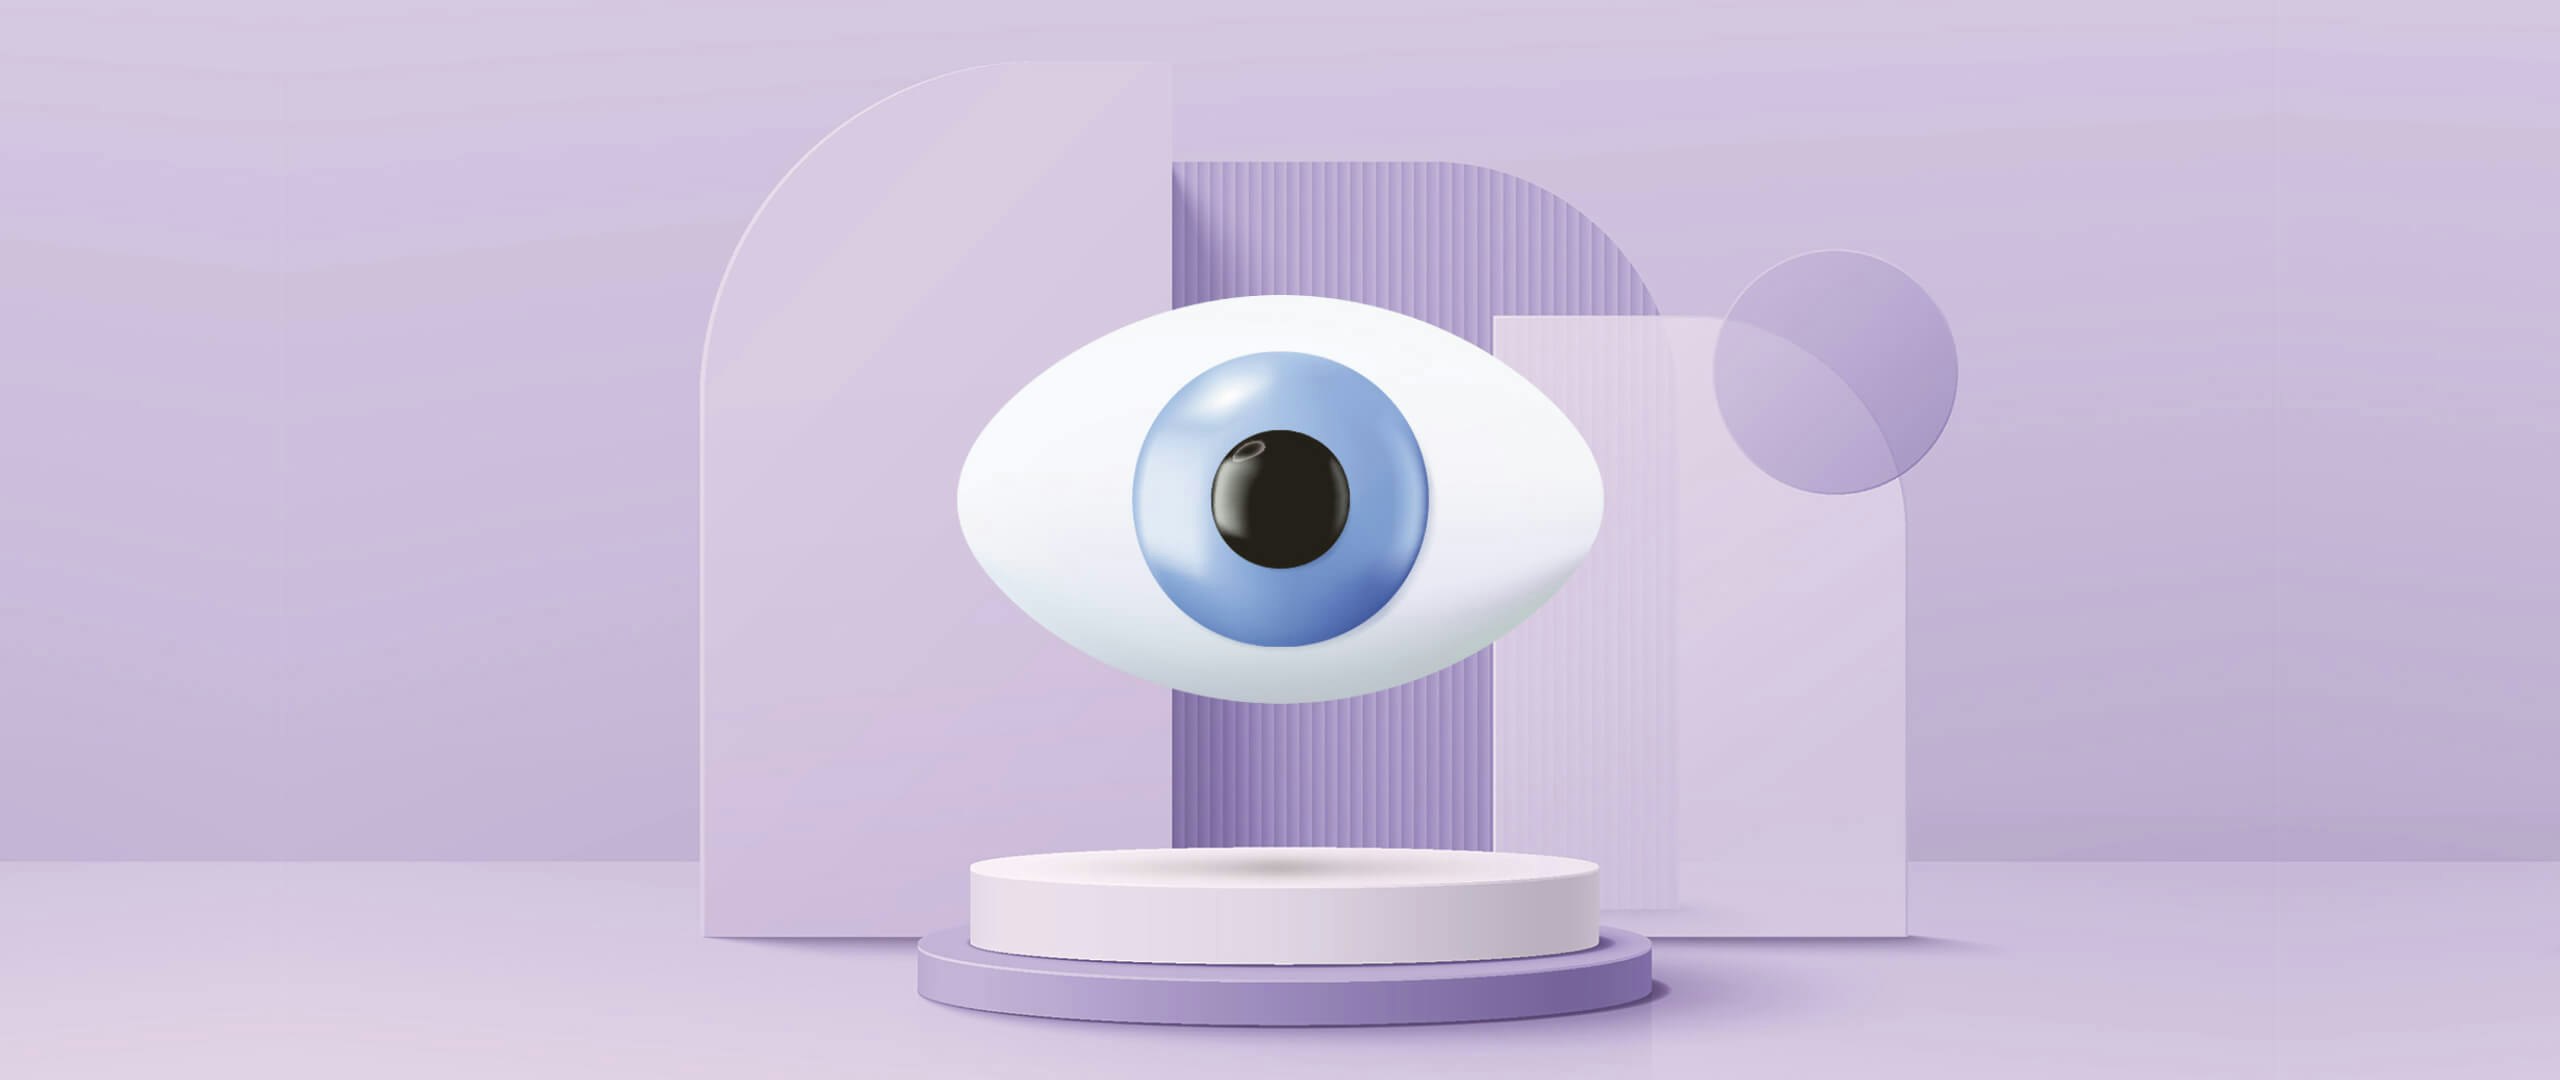 A mockup of a 3D eyeball, floating on a purple background.